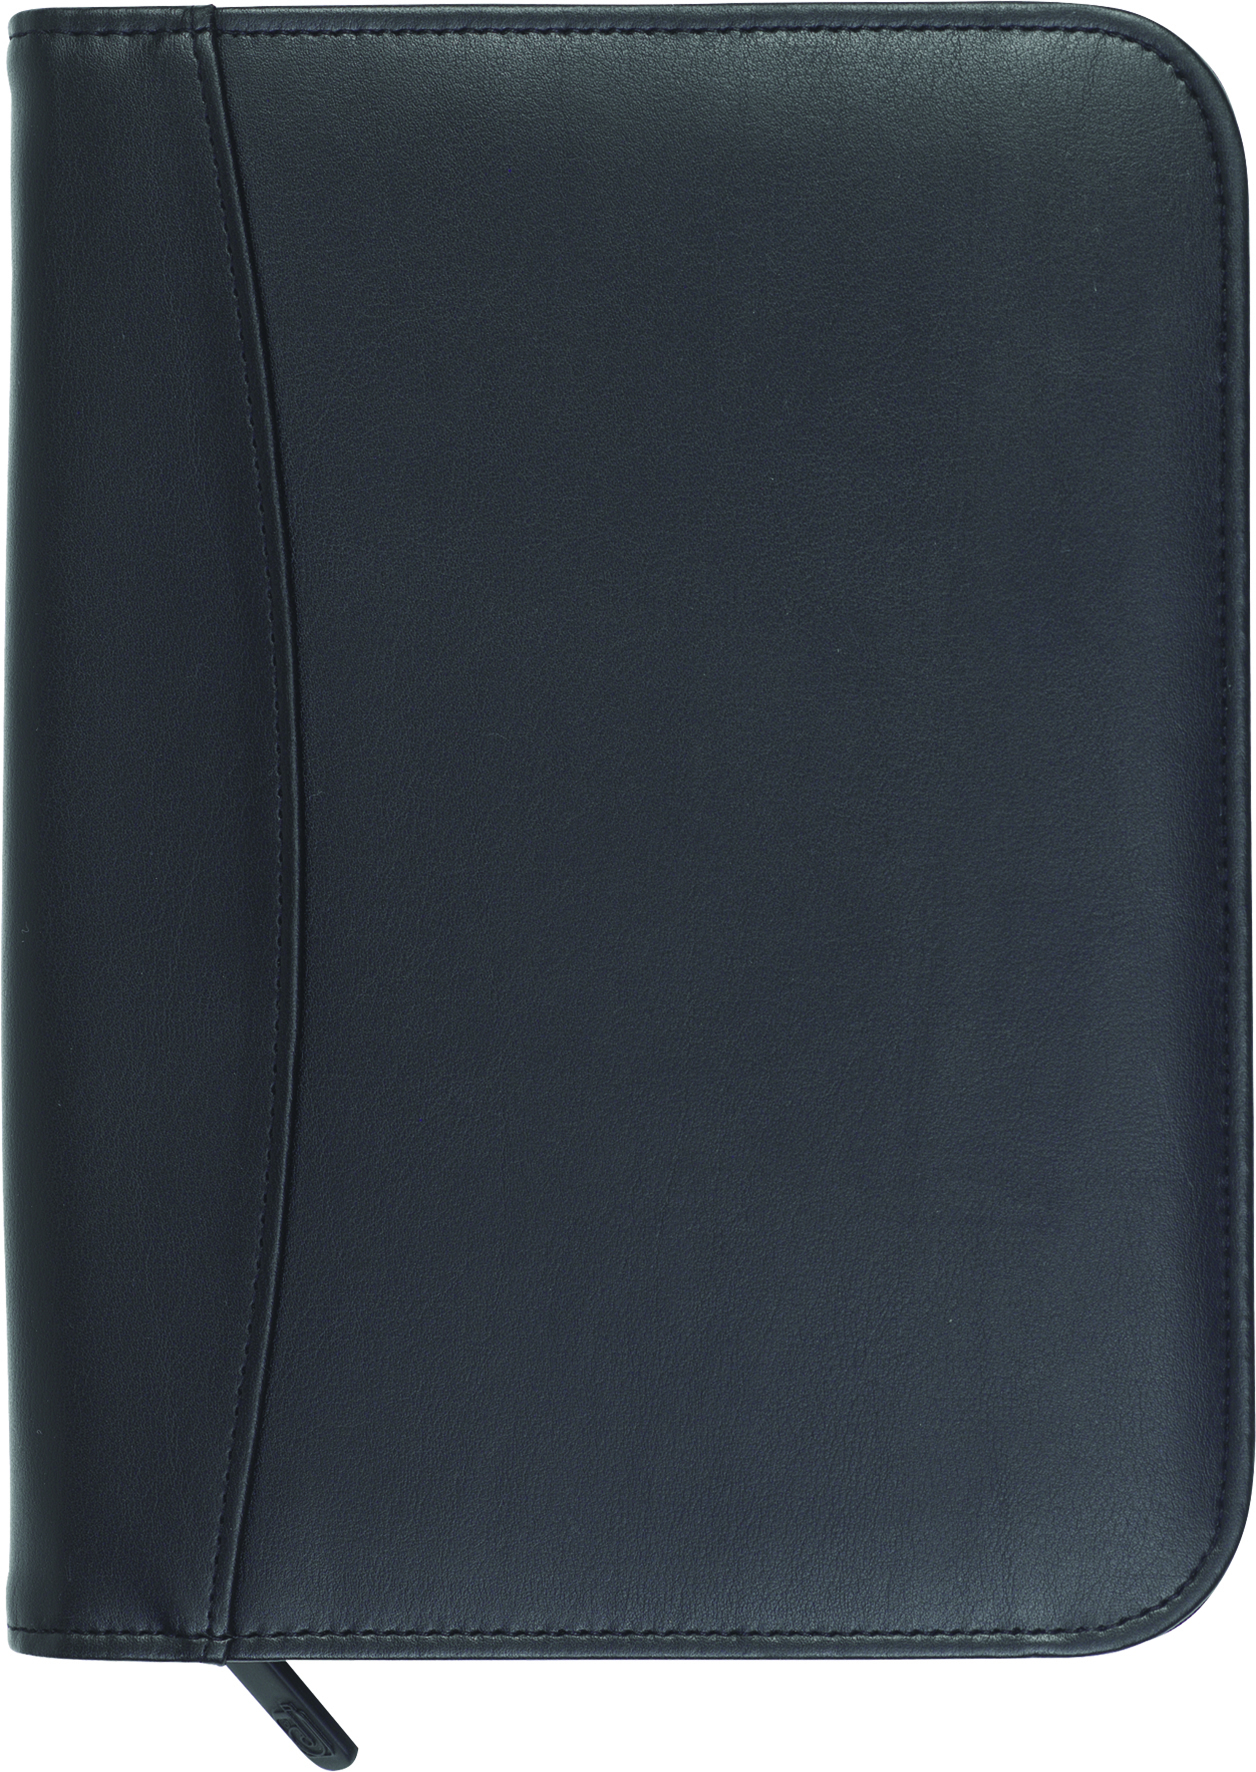 black A5 conference folder with soft padded cover